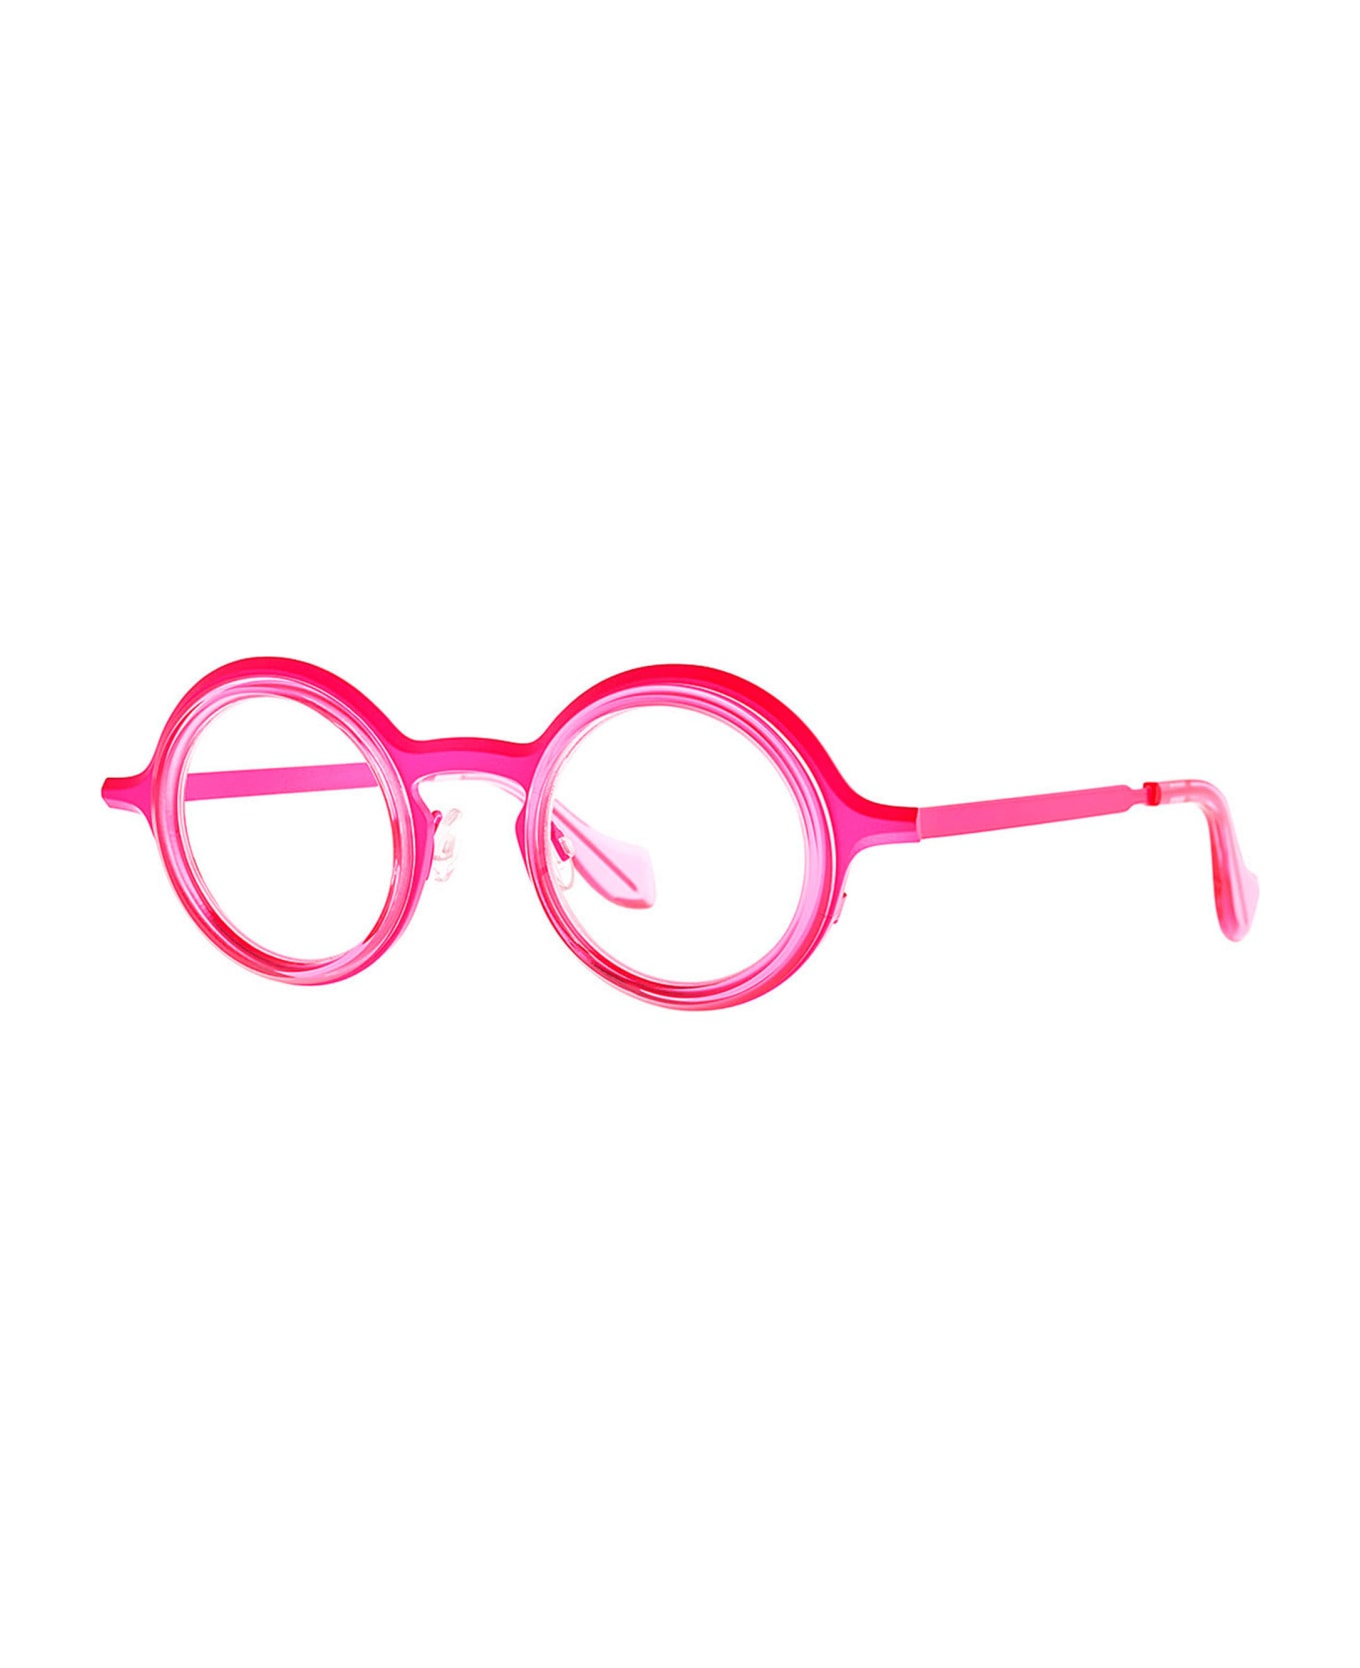 Theo Eyewear Cabochon - 013 Fluo Pink Rx Glasses - pink アイウェア